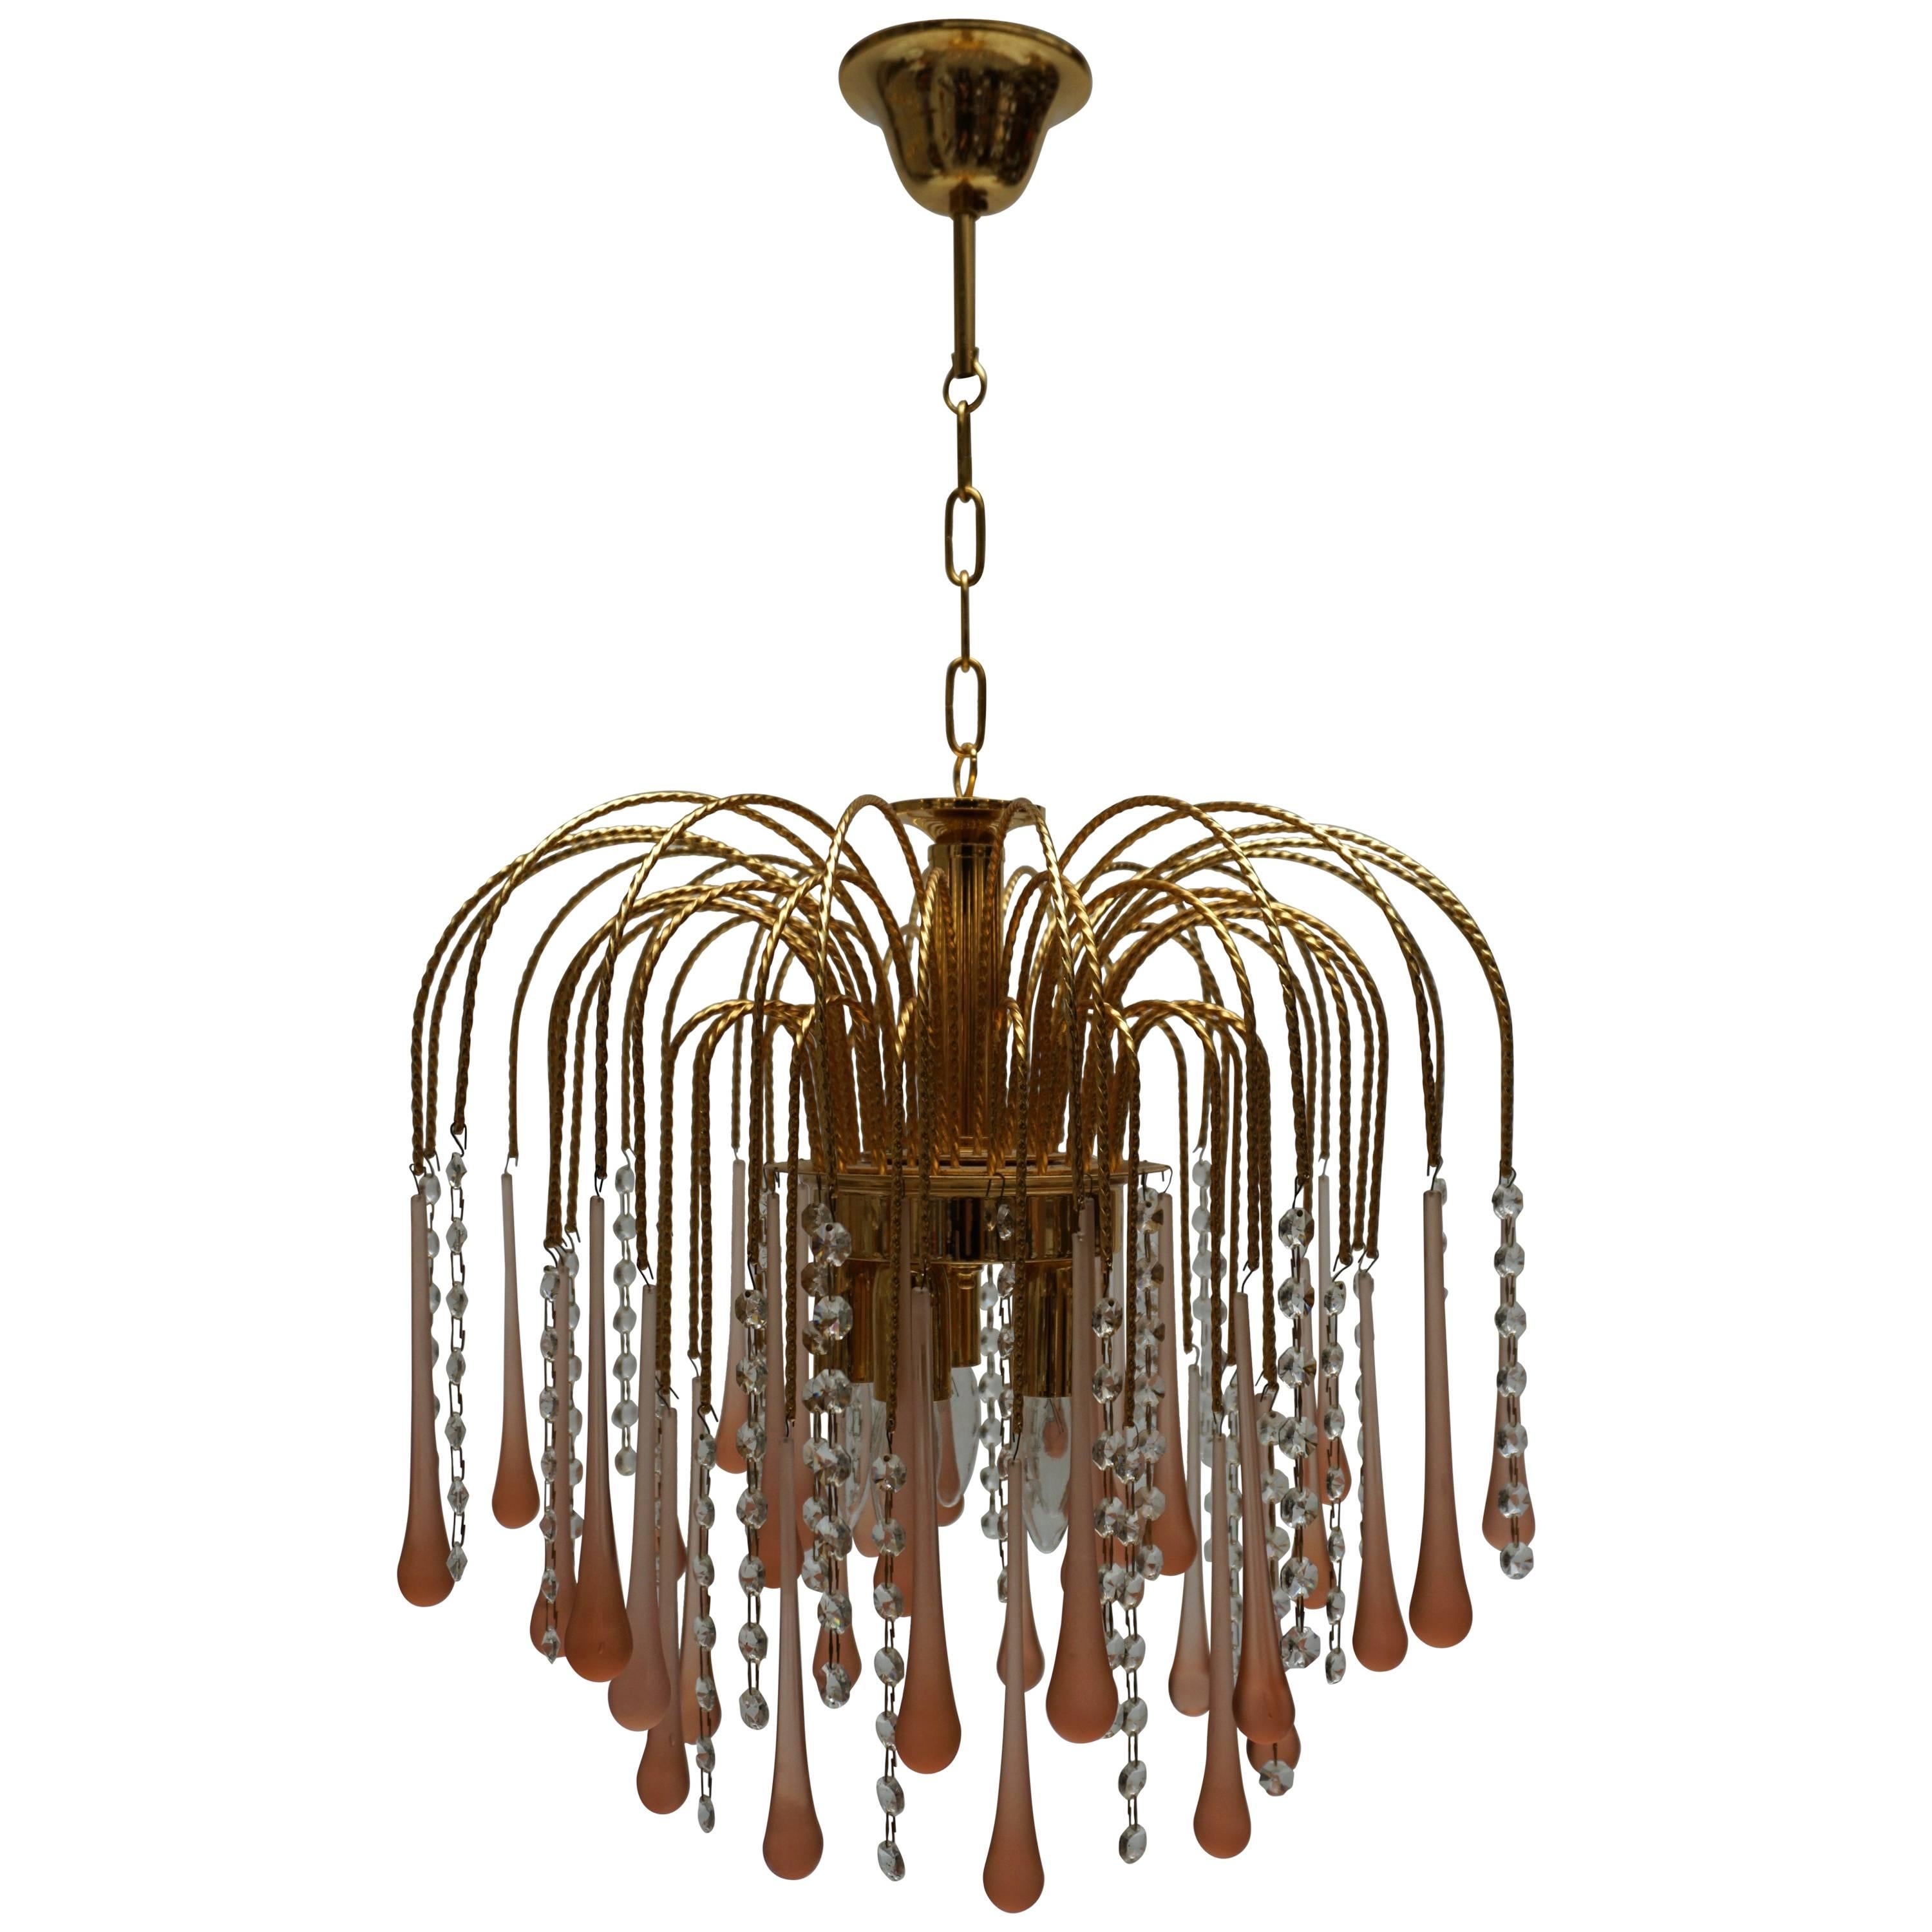 One of Two Italian Brass and Murano Glass Teardrop Chandelier For Sale